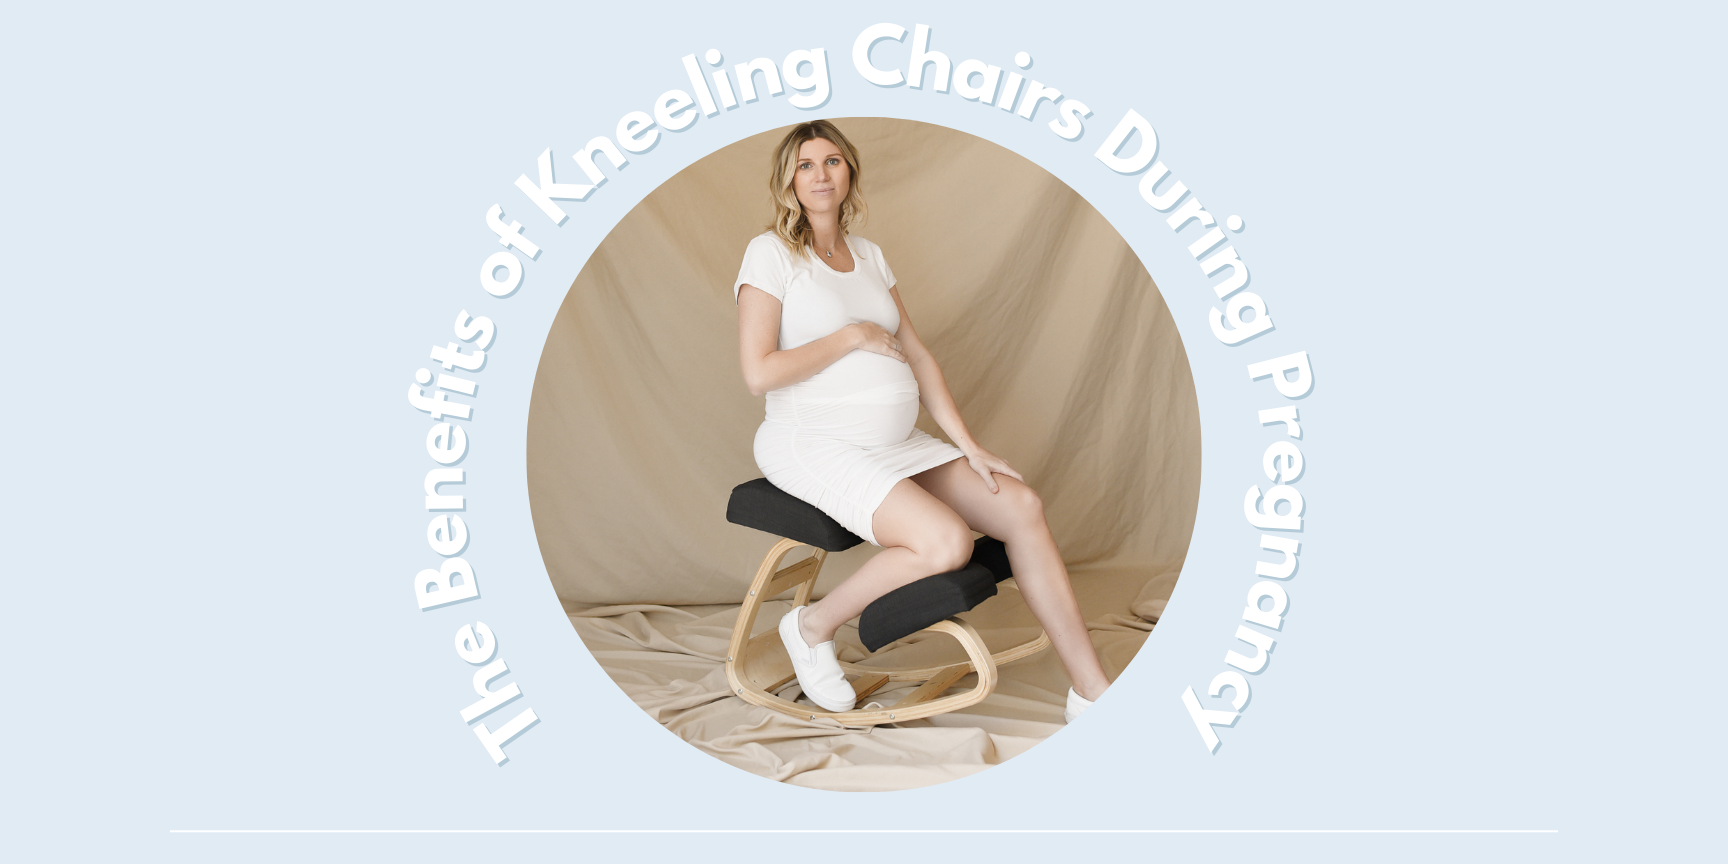 Pregnant-lady-on-kneeling-chair - Community Chiropractic